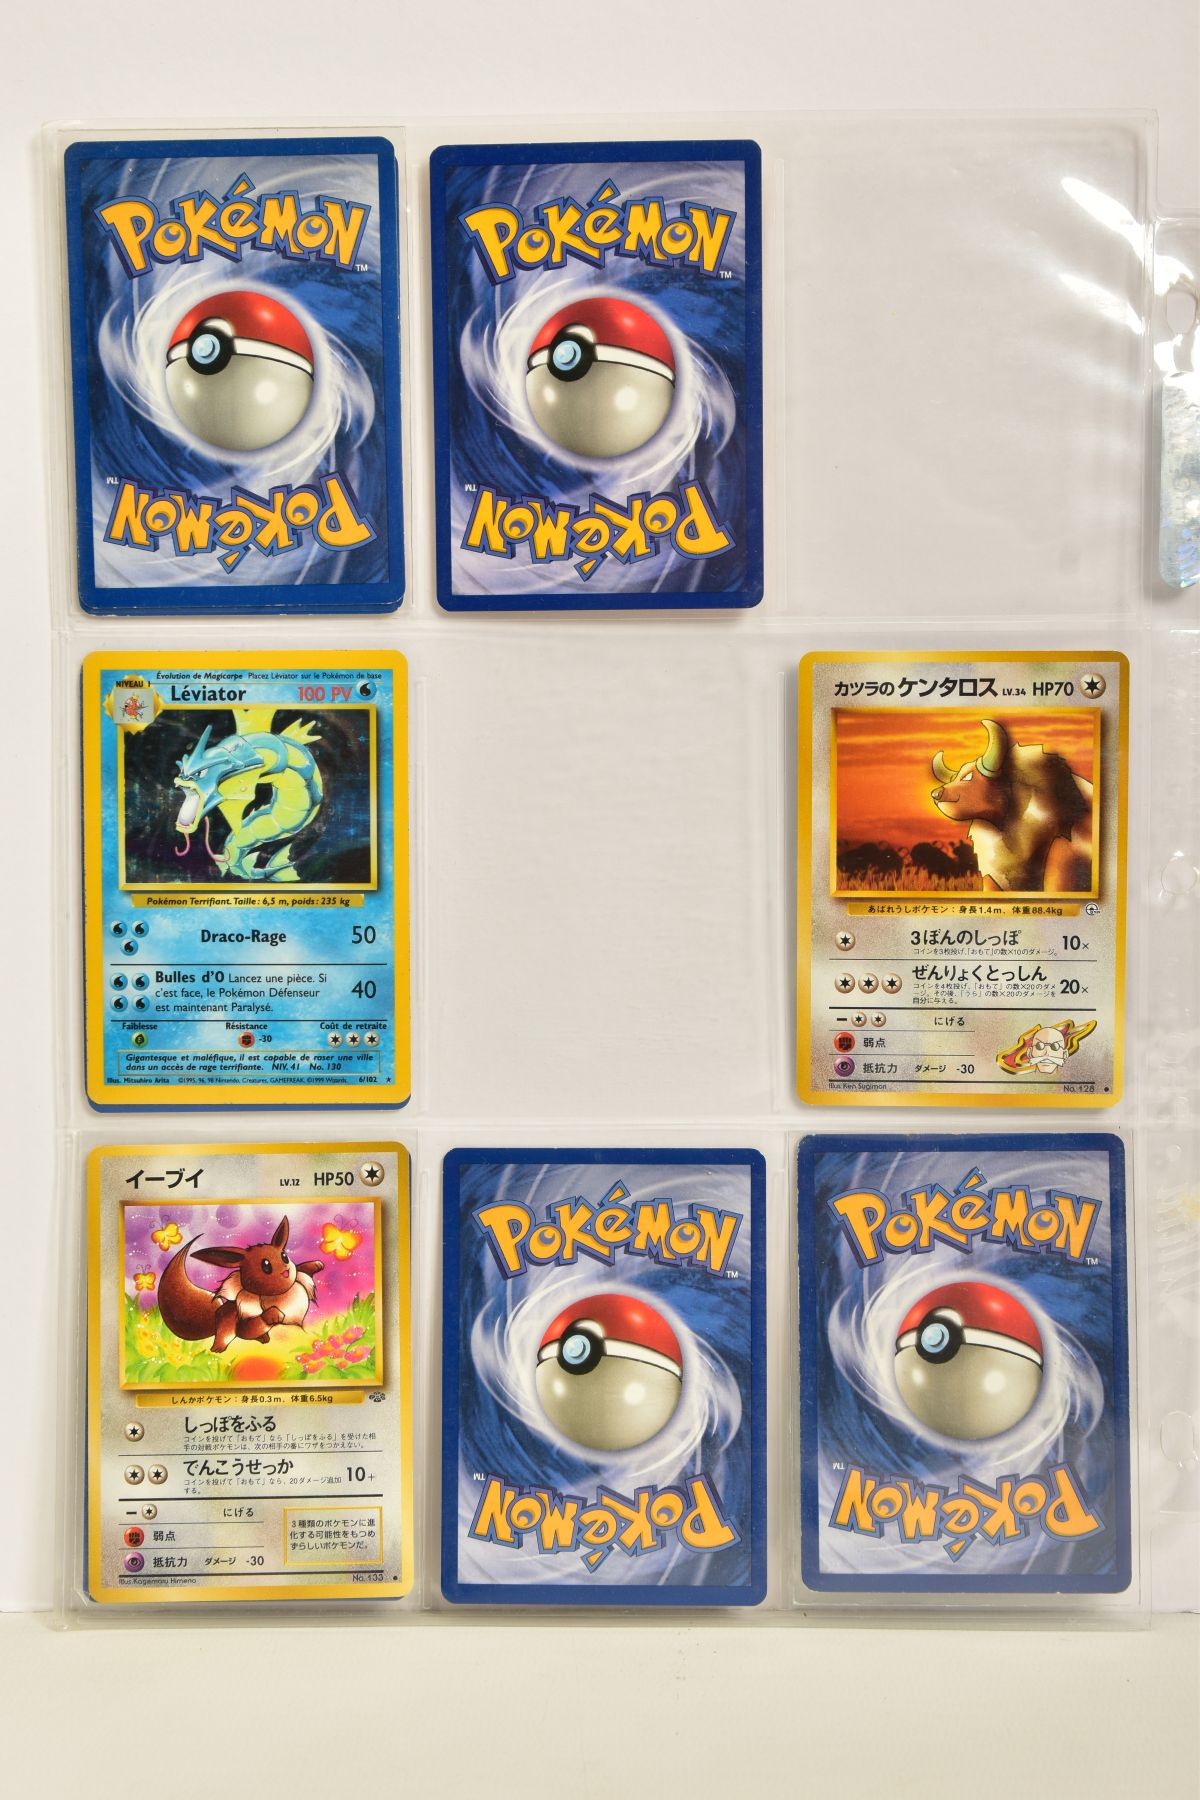 A QUANTITY OF POKEMON TCG CARDS, cards are assorted from Base Set, Base Set 2, Jungle, Fossil, - Image 31 of 46